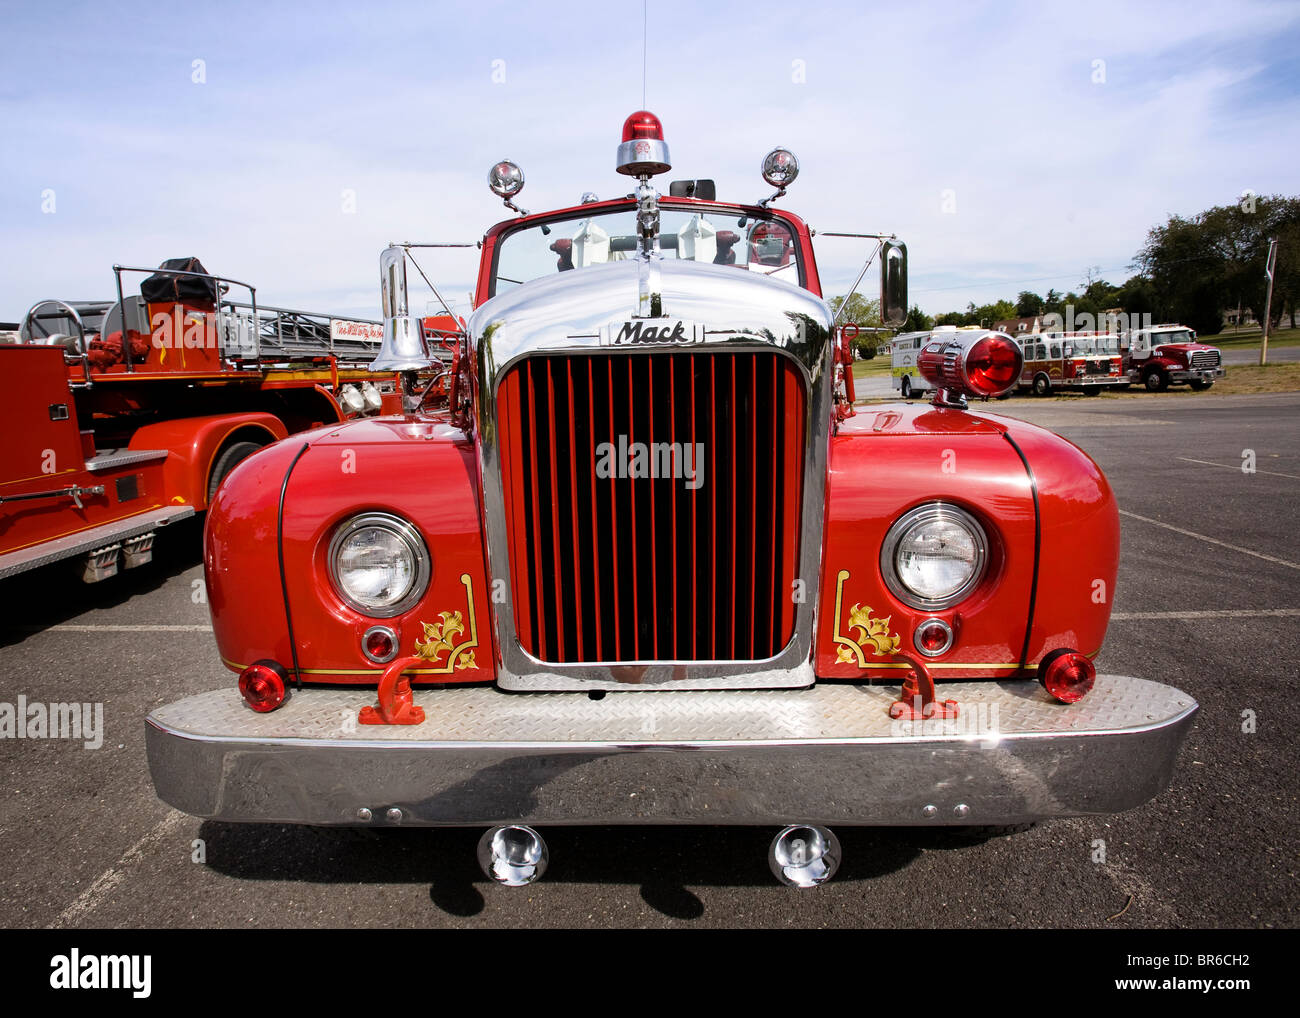 Grille of 1950s Mack fire truck Stock Photo